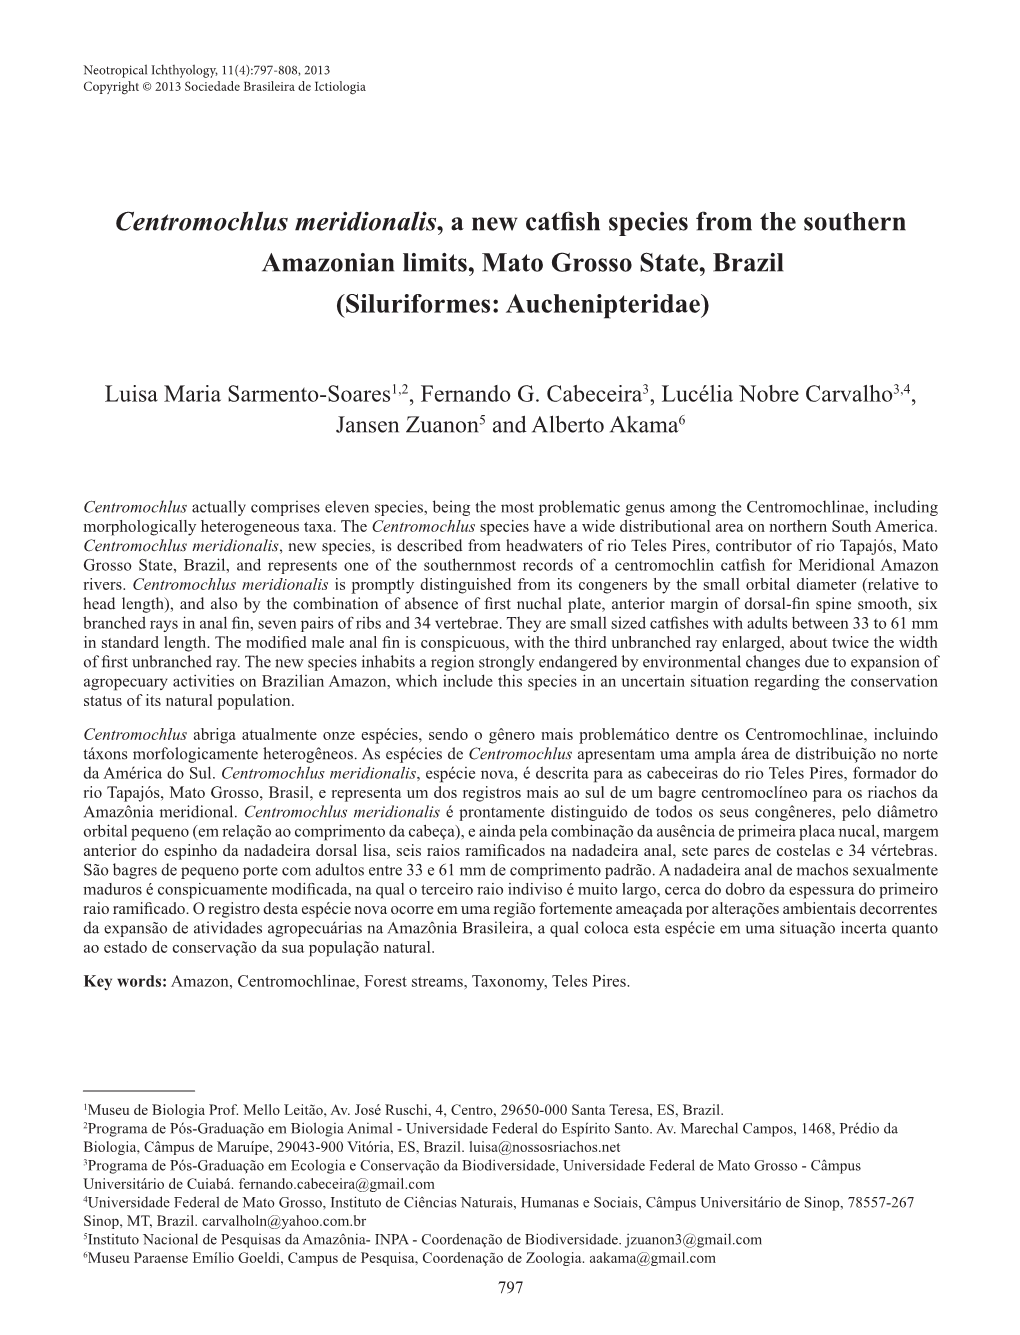 Centromochlus Meridionalis, a New Catfish Species from the Southern Amazonian Limits, Mato Grosso State, Brazil (Siluriformes: Auchenipteridae)